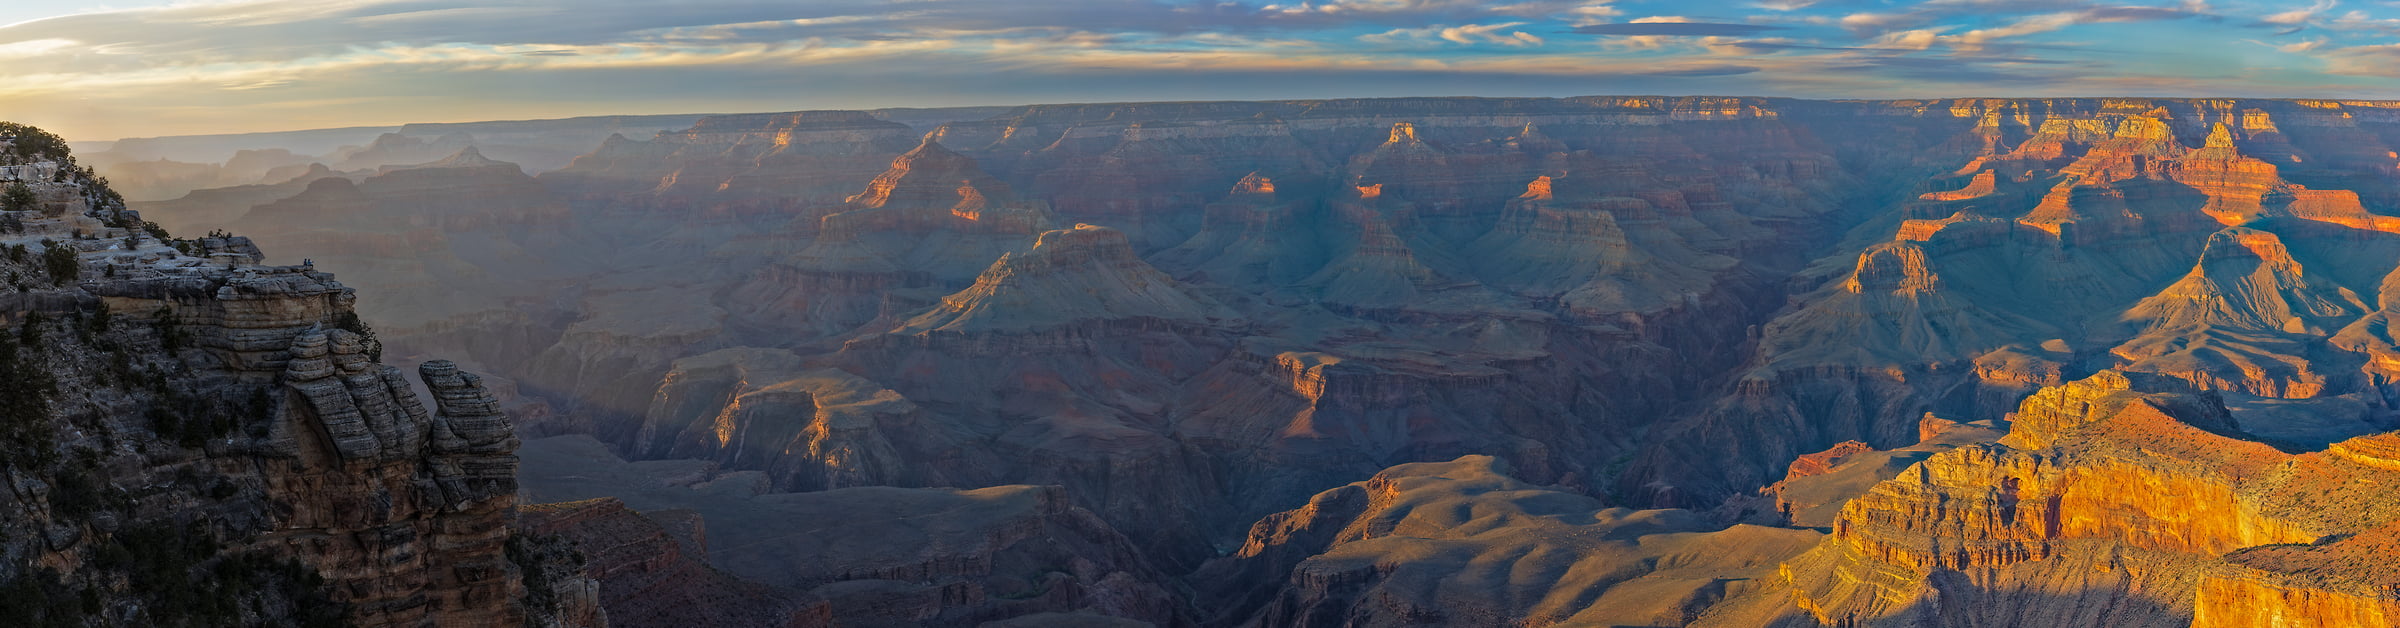 4,299 megapixels! A very high resolution, large-format VAST photo print of the Grand Canyon at sunset; photograph created by John Freeman in Mather Point, South Rim, Grand Canyon, Arizona.